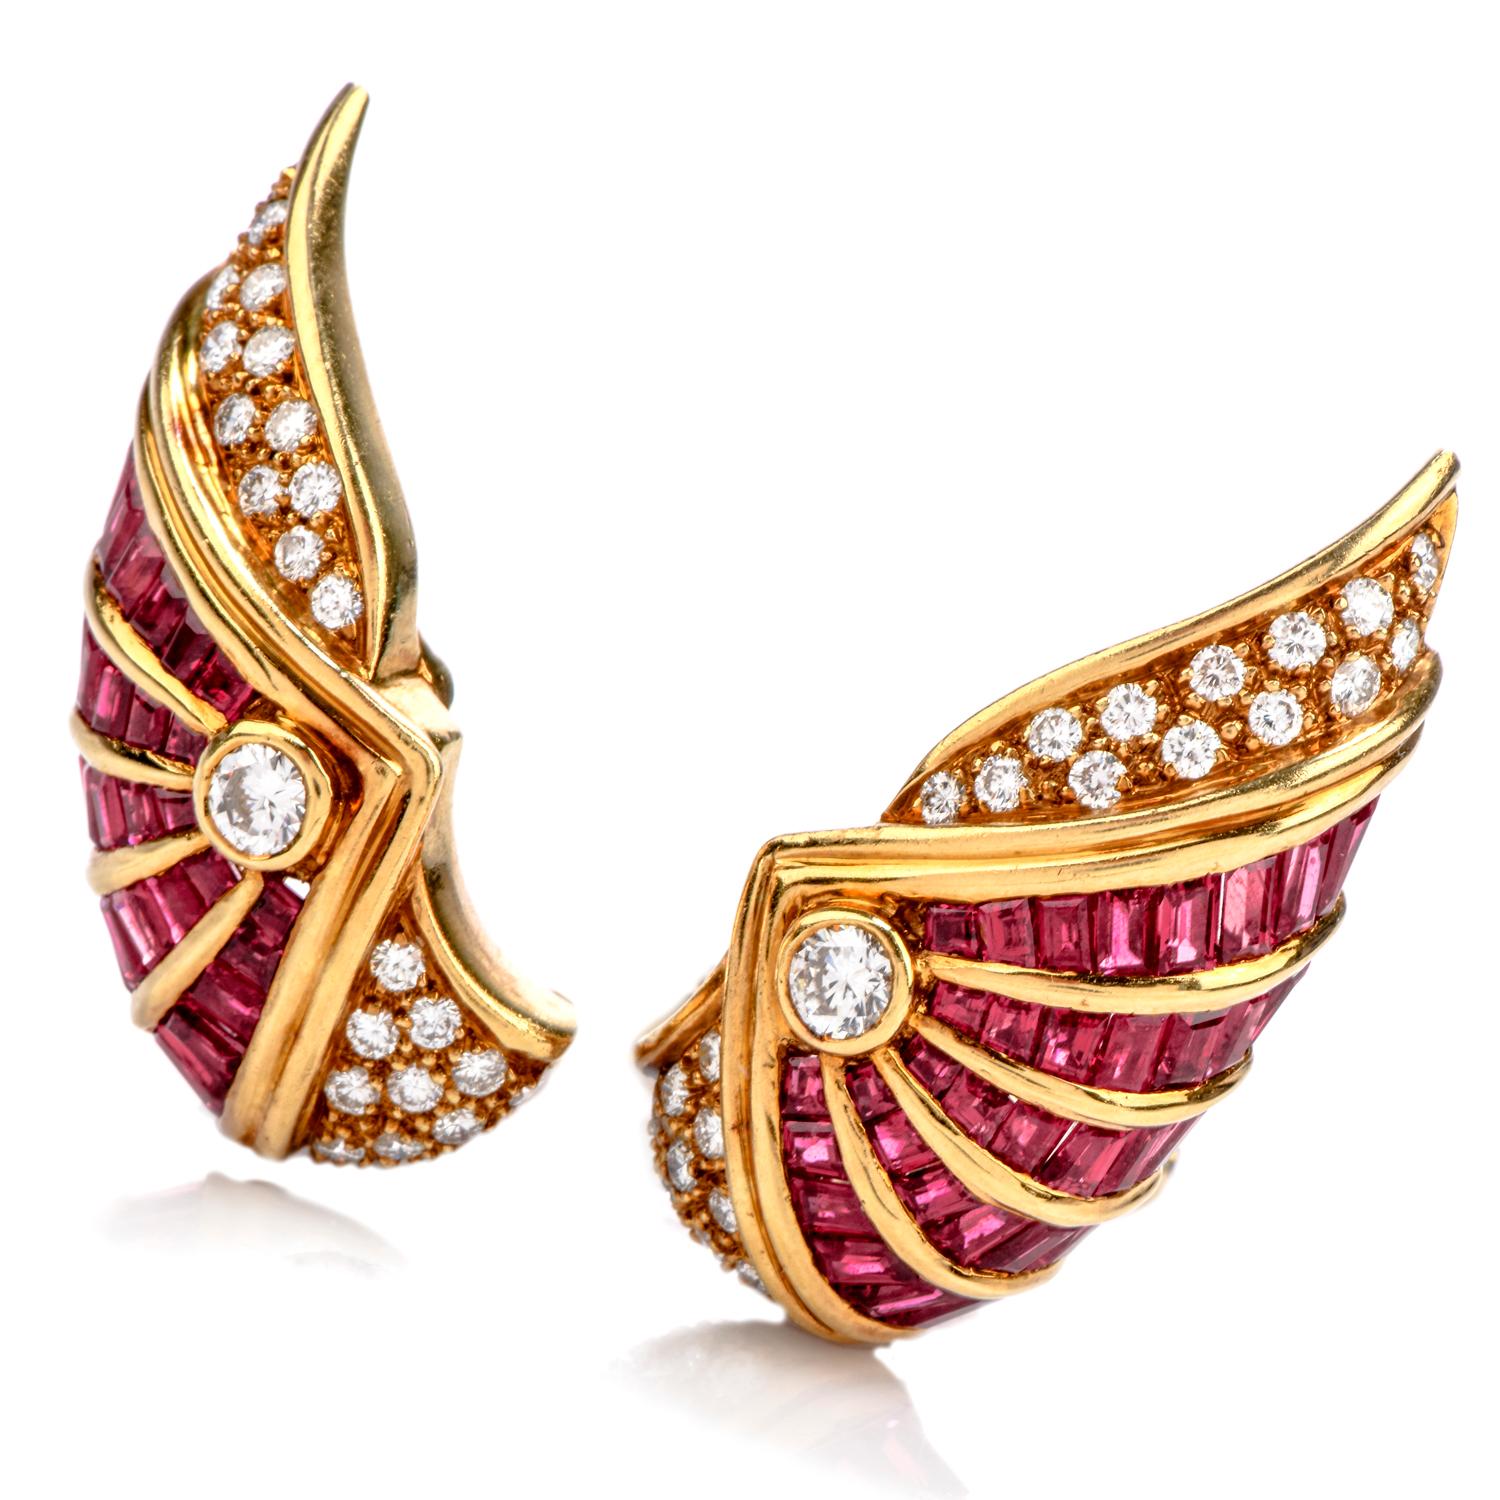 These stunning Vintage  Earrings are crafted in Solid 18K Yellow Gold,

weigh 21.7 grams and measure 33 mm long by 15 millimeters wide. 

They are perfectly detailed and inspired in Ornamental Wings!

In the Center of each piece there are Two